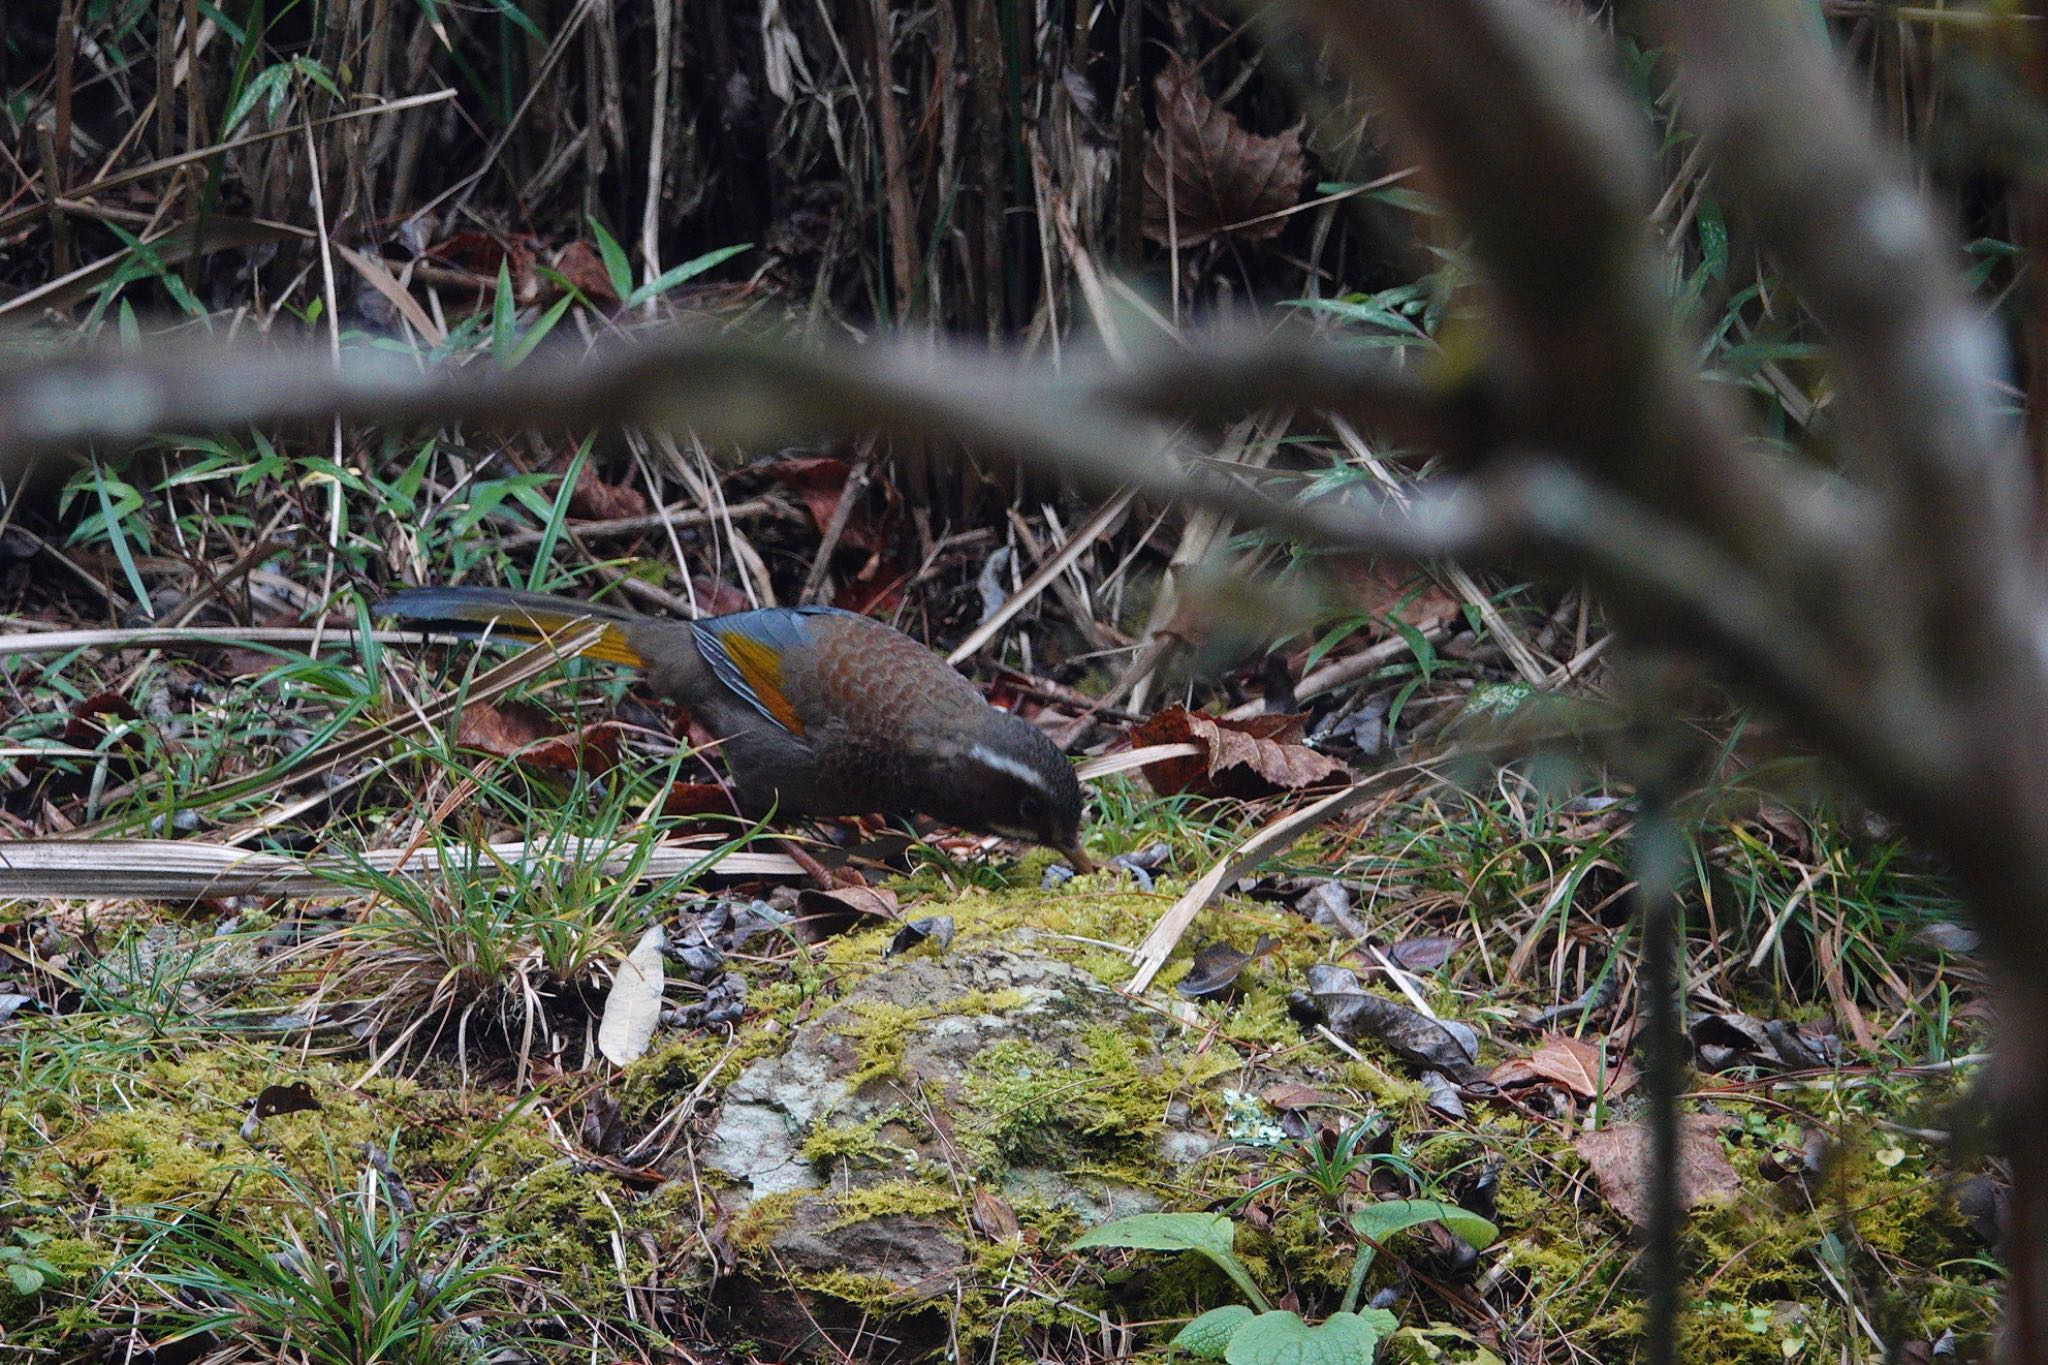 Photo of White-whiskered Laughingthrush at 阿里山国家森林遊楽区 by のどか